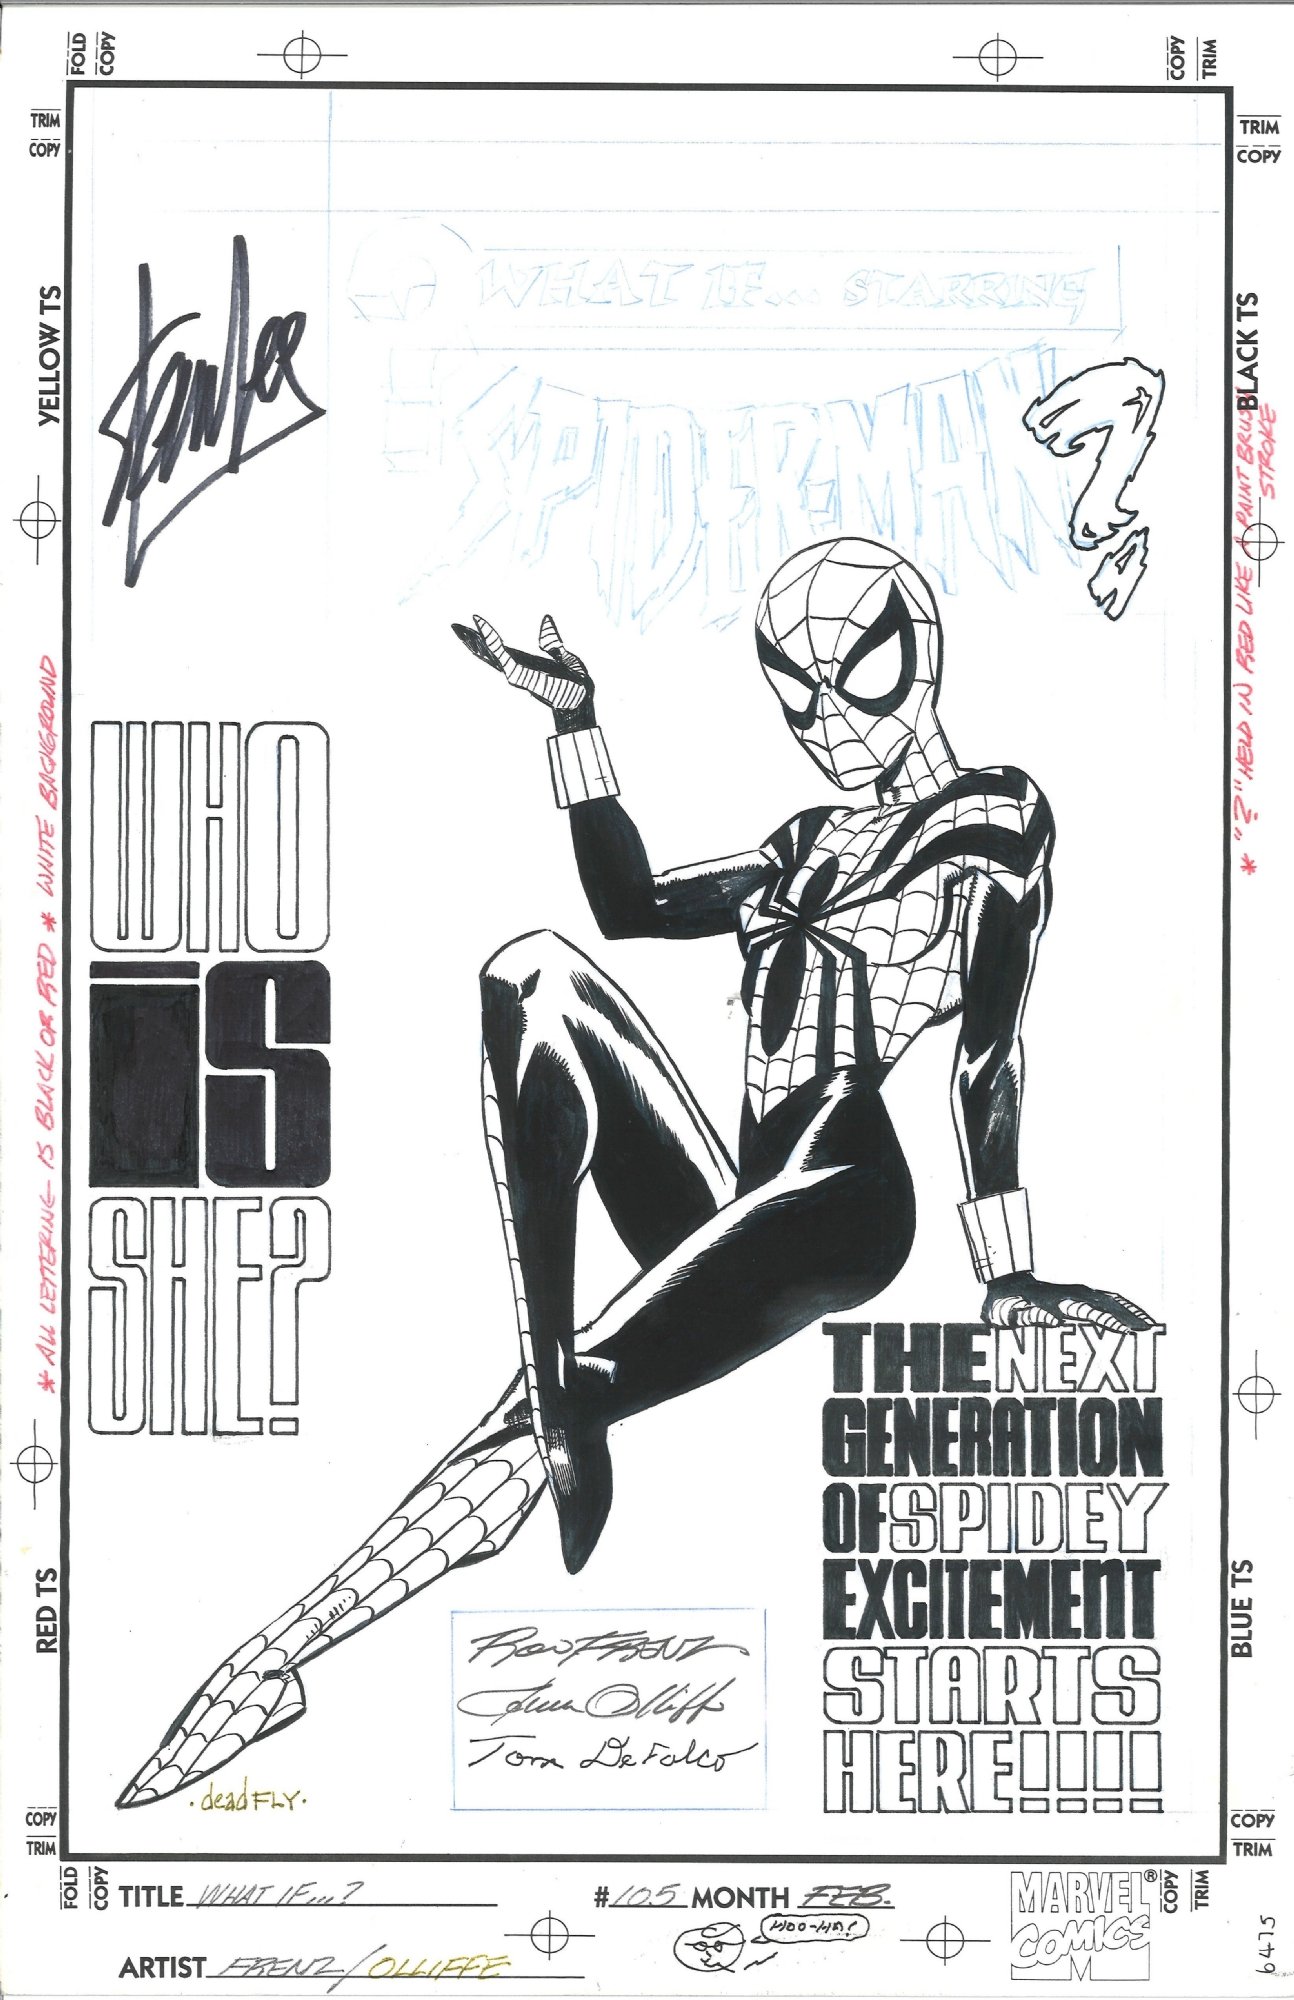 WHAT IF...? #105 (Marvel, Feb. 1998) Starring SPIDER-MAN and